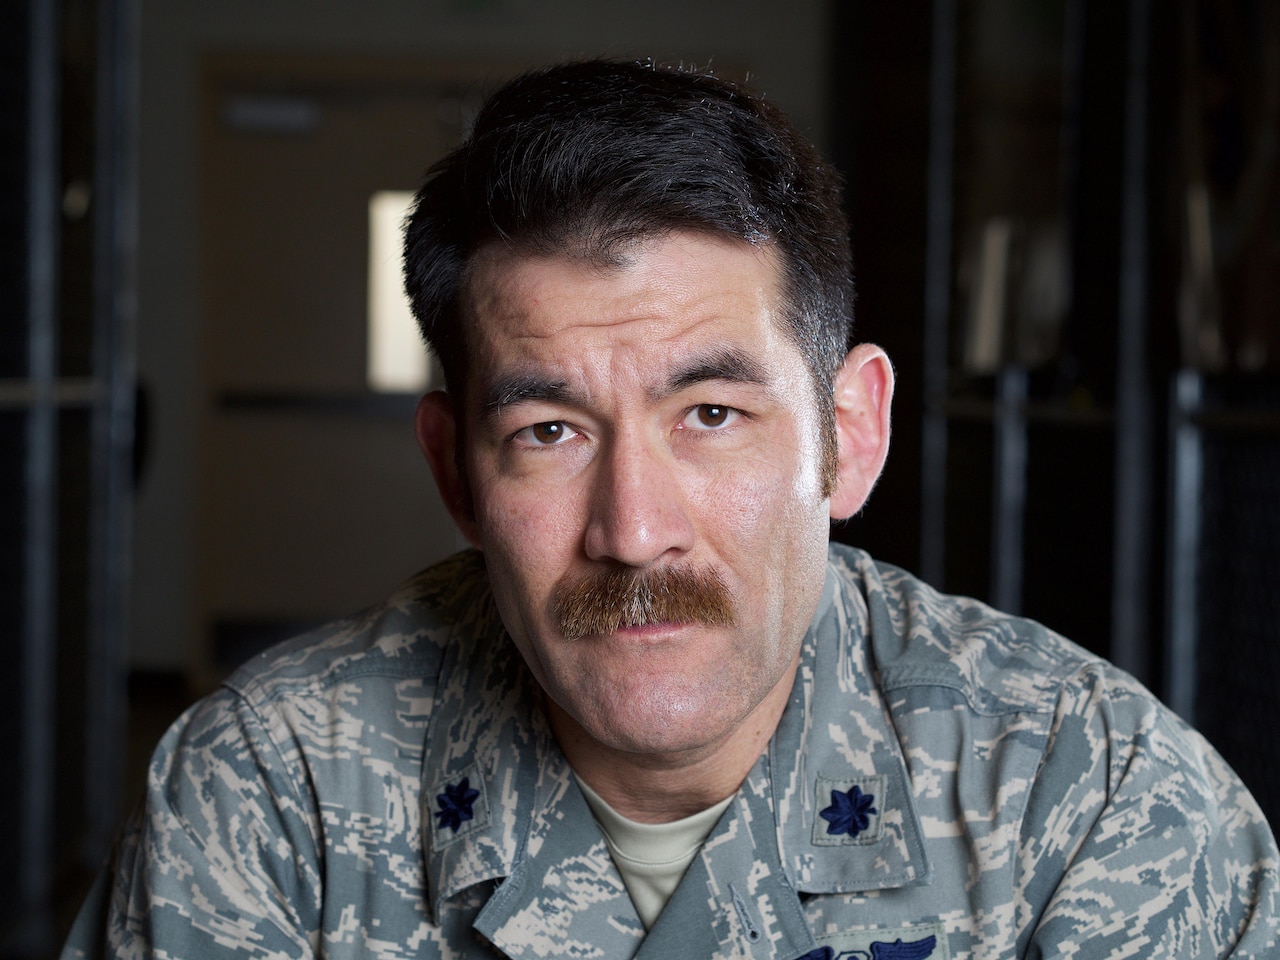 Alaska Air National Guard Lt. Col. Matthew Komatsu, commander of the 212th Rescue Squadron, wrote about his experiences during a Sept. 14, 2012, Taliban attack of Camp Bastion. The story was published by the New York Times. Alaska Army National Guard photo by Sgt. David Bedard